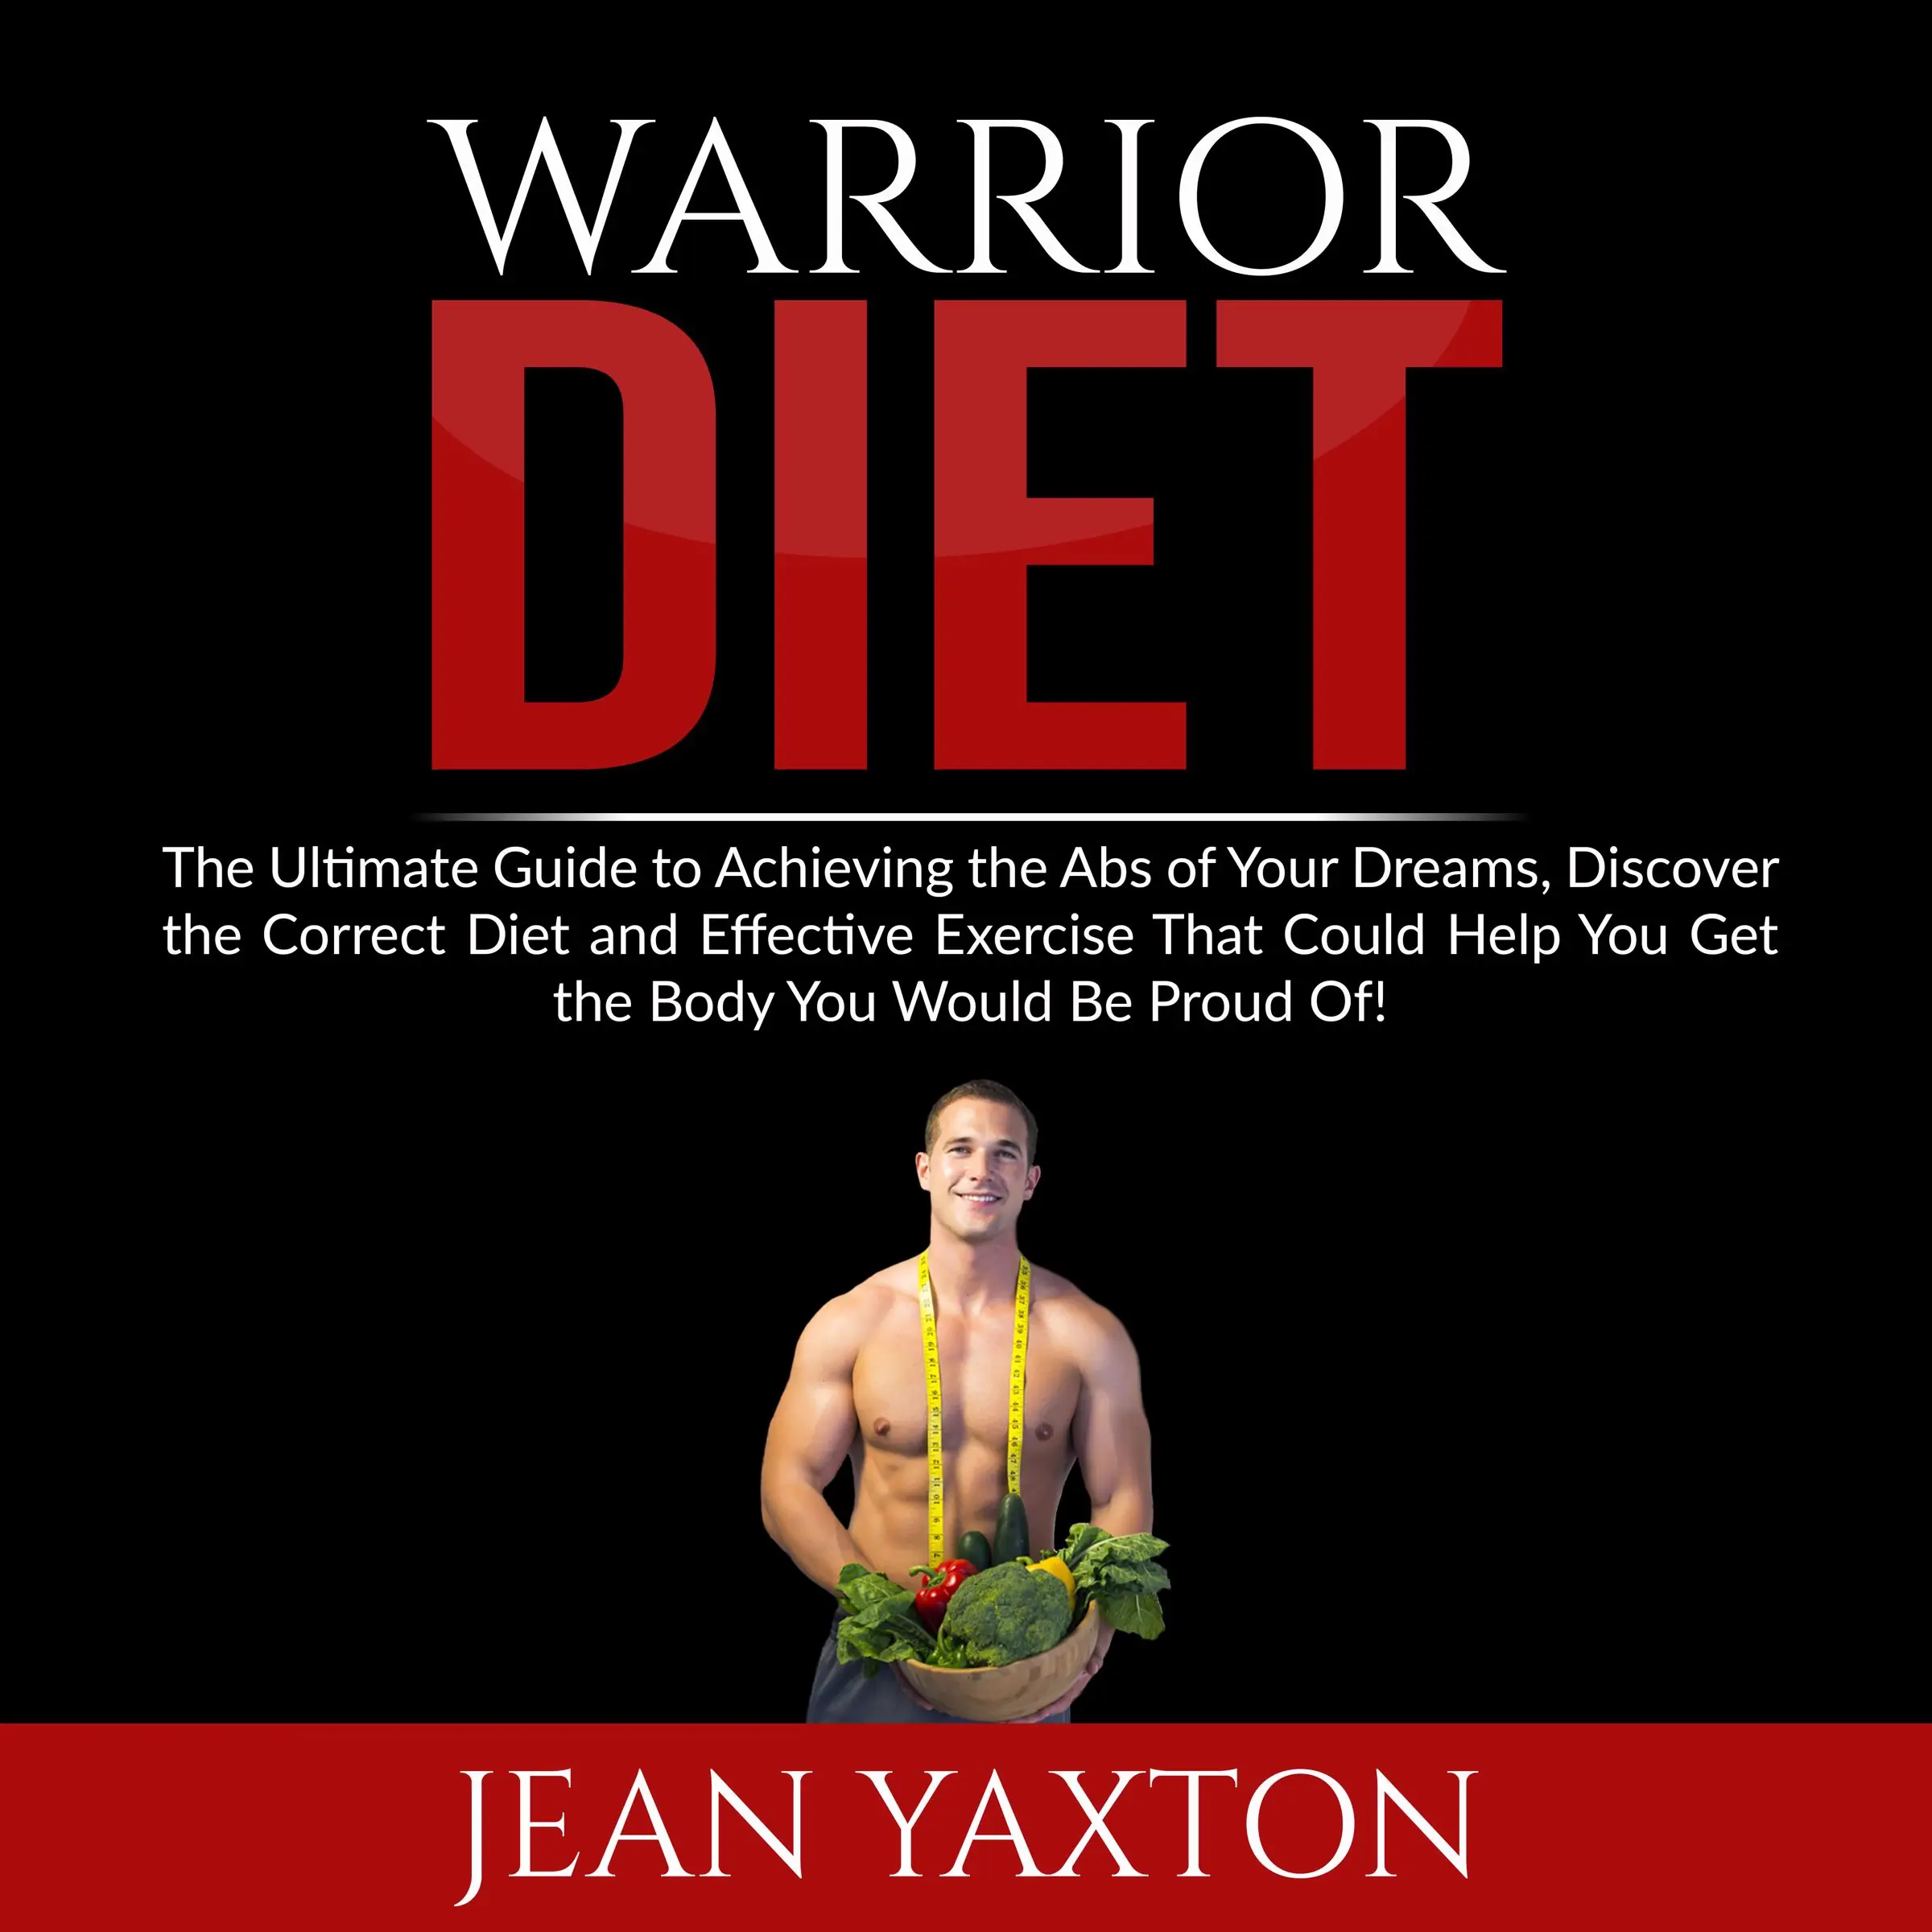 Warrior Diet: The Ultimate Guide to Achieving the Abs of Your Dreams, Discover the Correct Diet and Effective Exercise That Could Help You Get the Body You Would Be Proud Of! by Jean Yaxton Audiobook